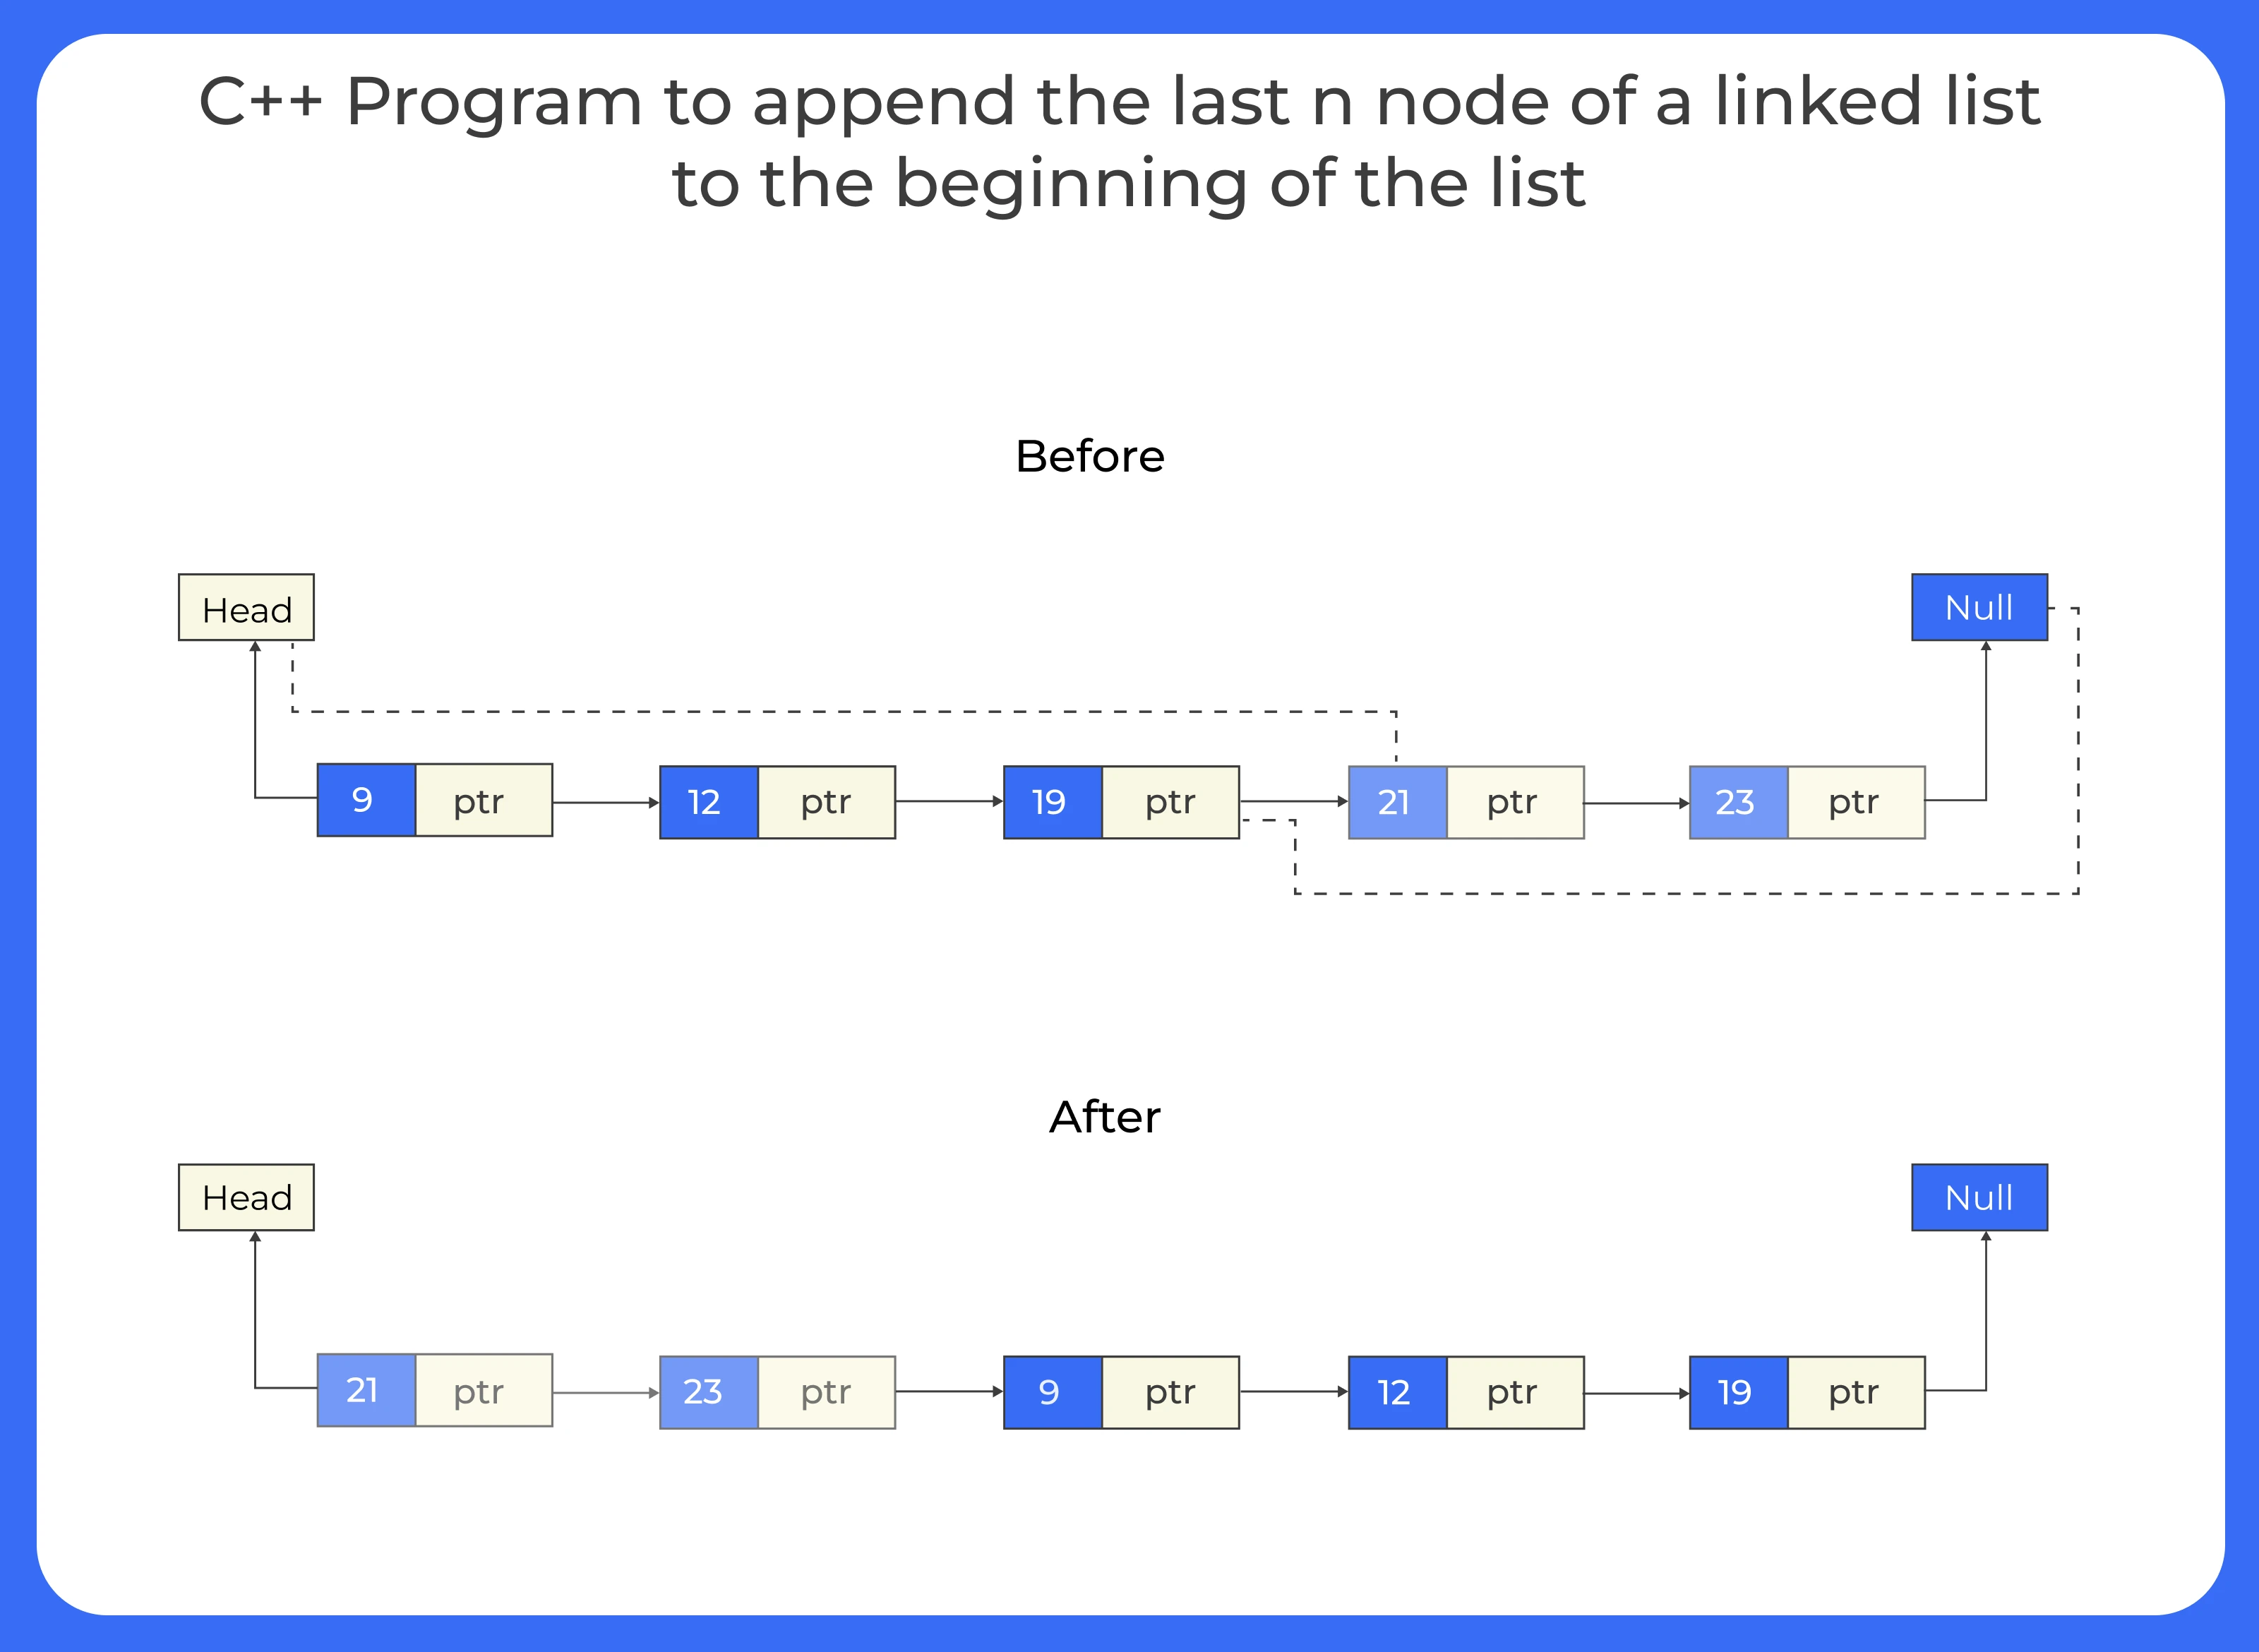 C++ program to append the last n nodes of a linked list to the beginning of the list (2)